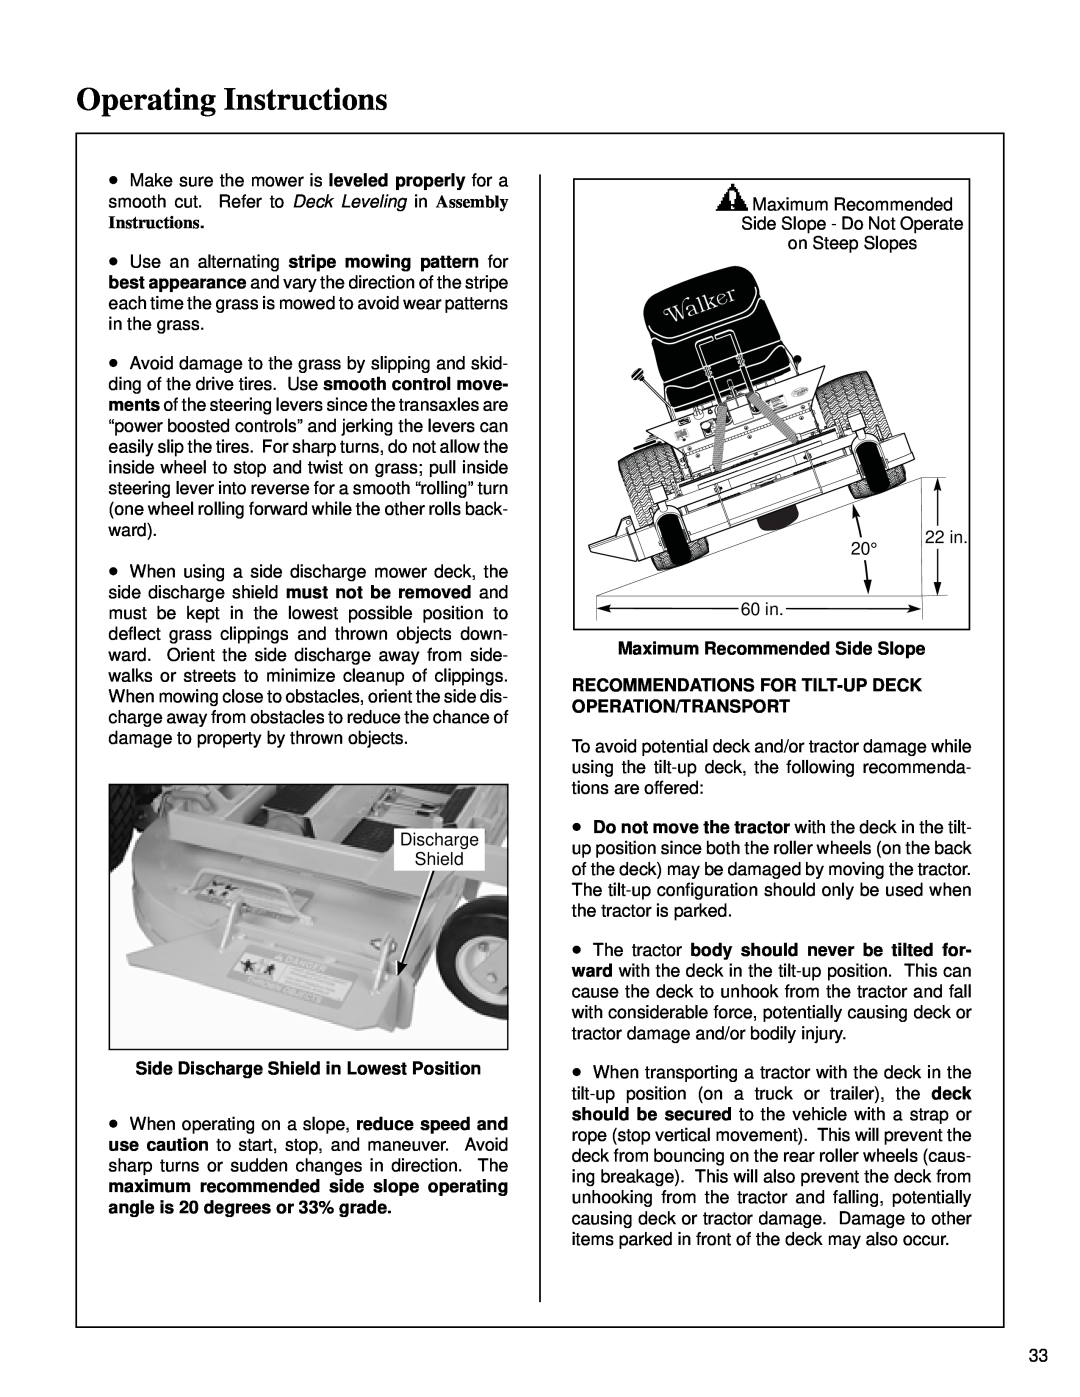 Briggs & Stratton MB (18 HP) owner manual Operating Instructions, Side Discharge Shield in Lowest Position 